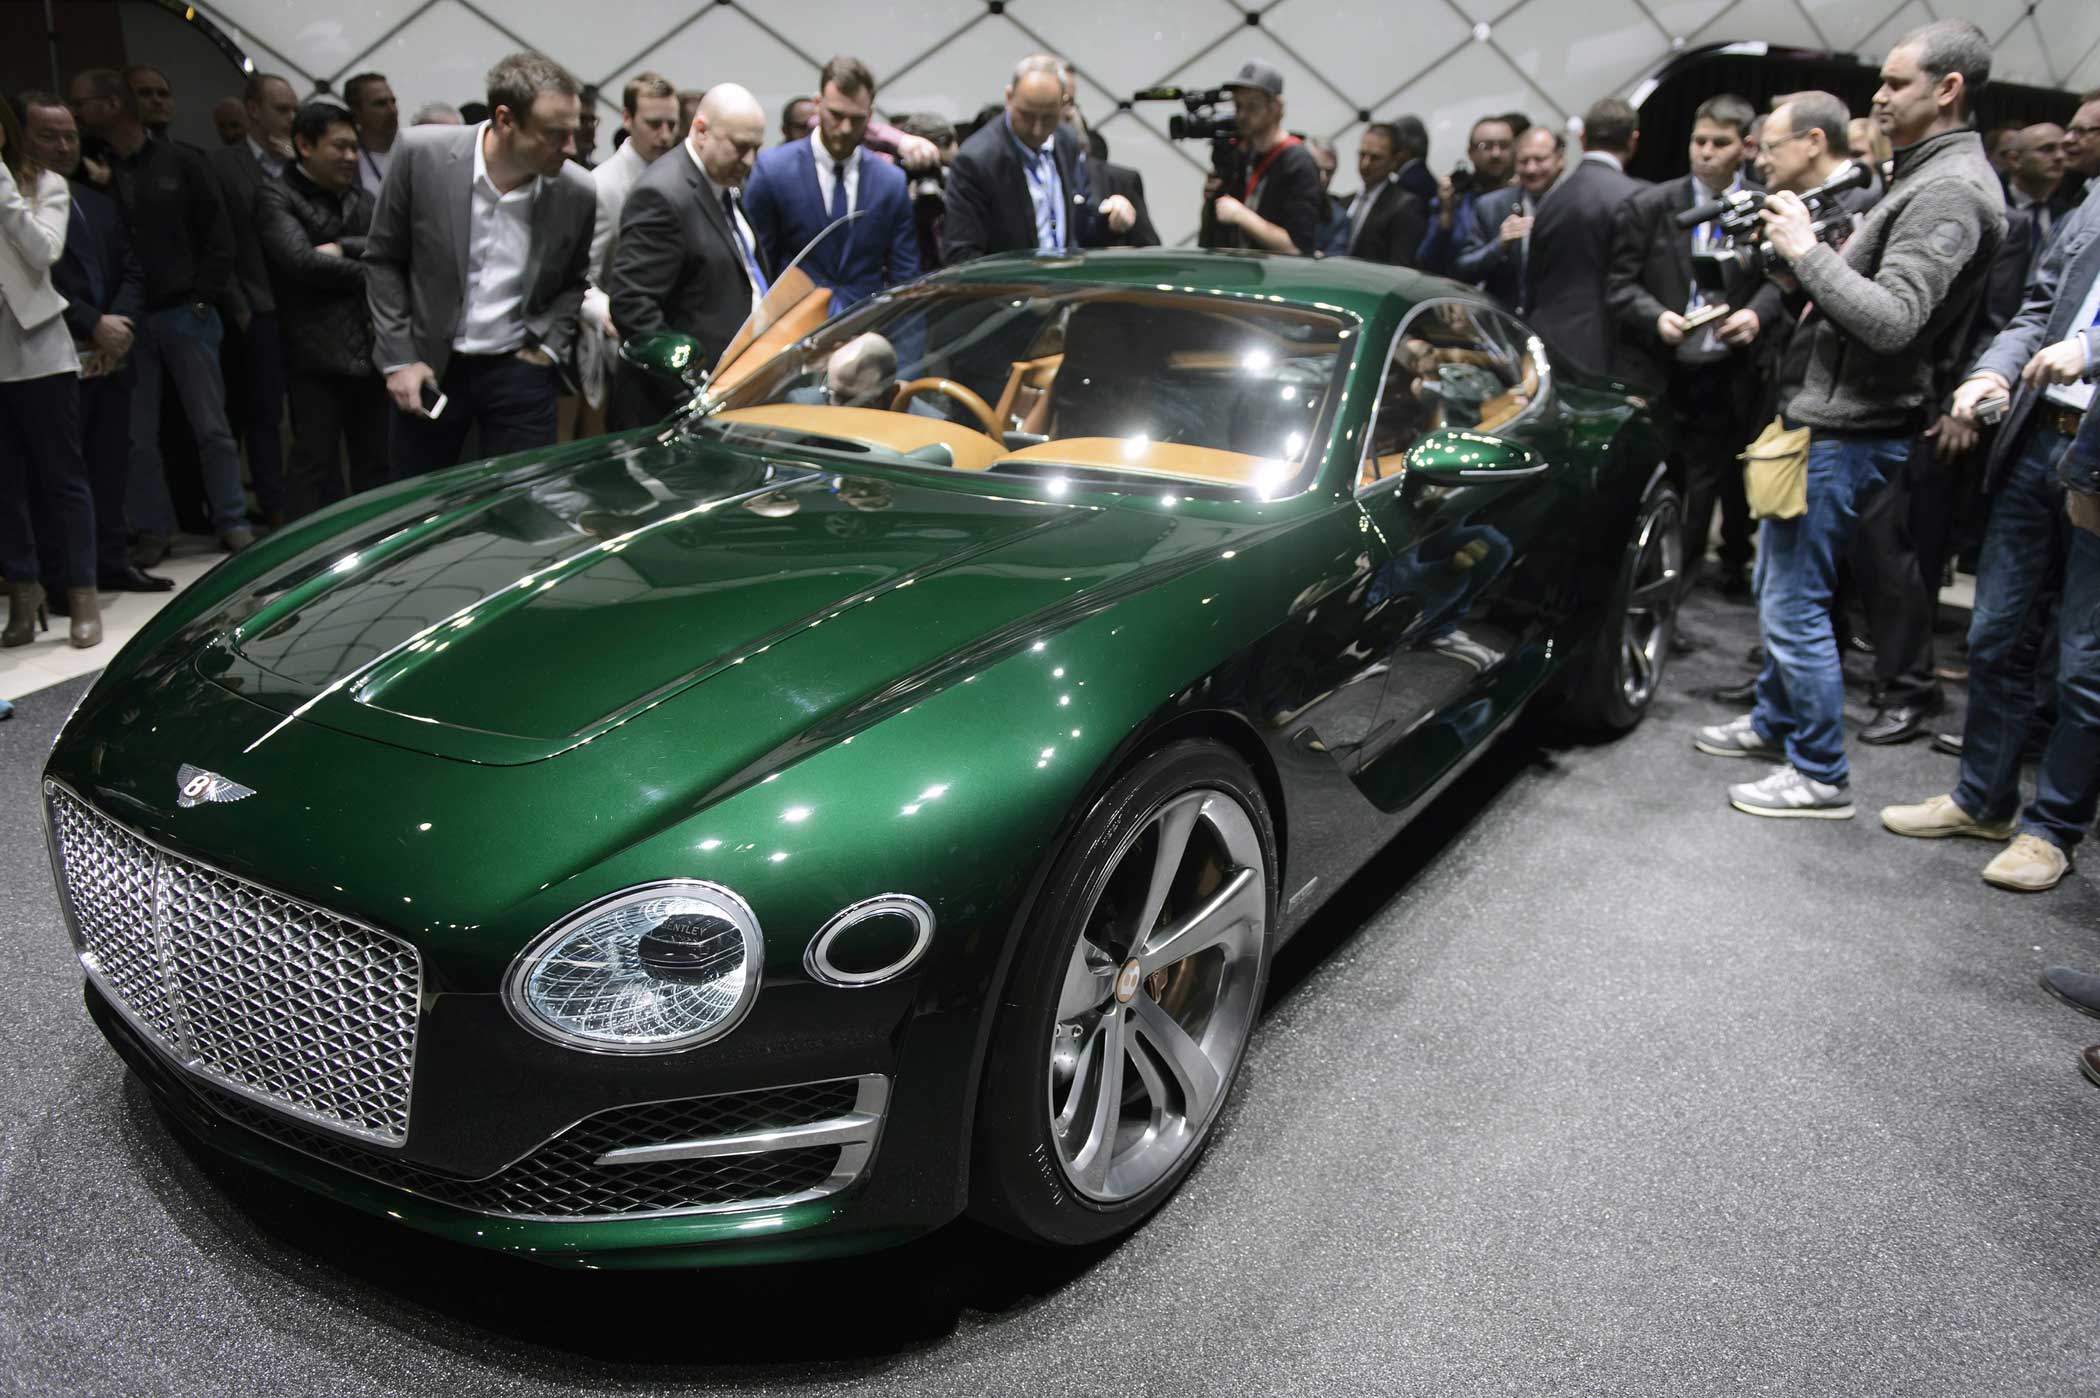 The new Bentley EXP 10 Speed 6 Concept, shown during the first press day at the 85th Geneva International Motor Show in Geneva on March 3, 2015.